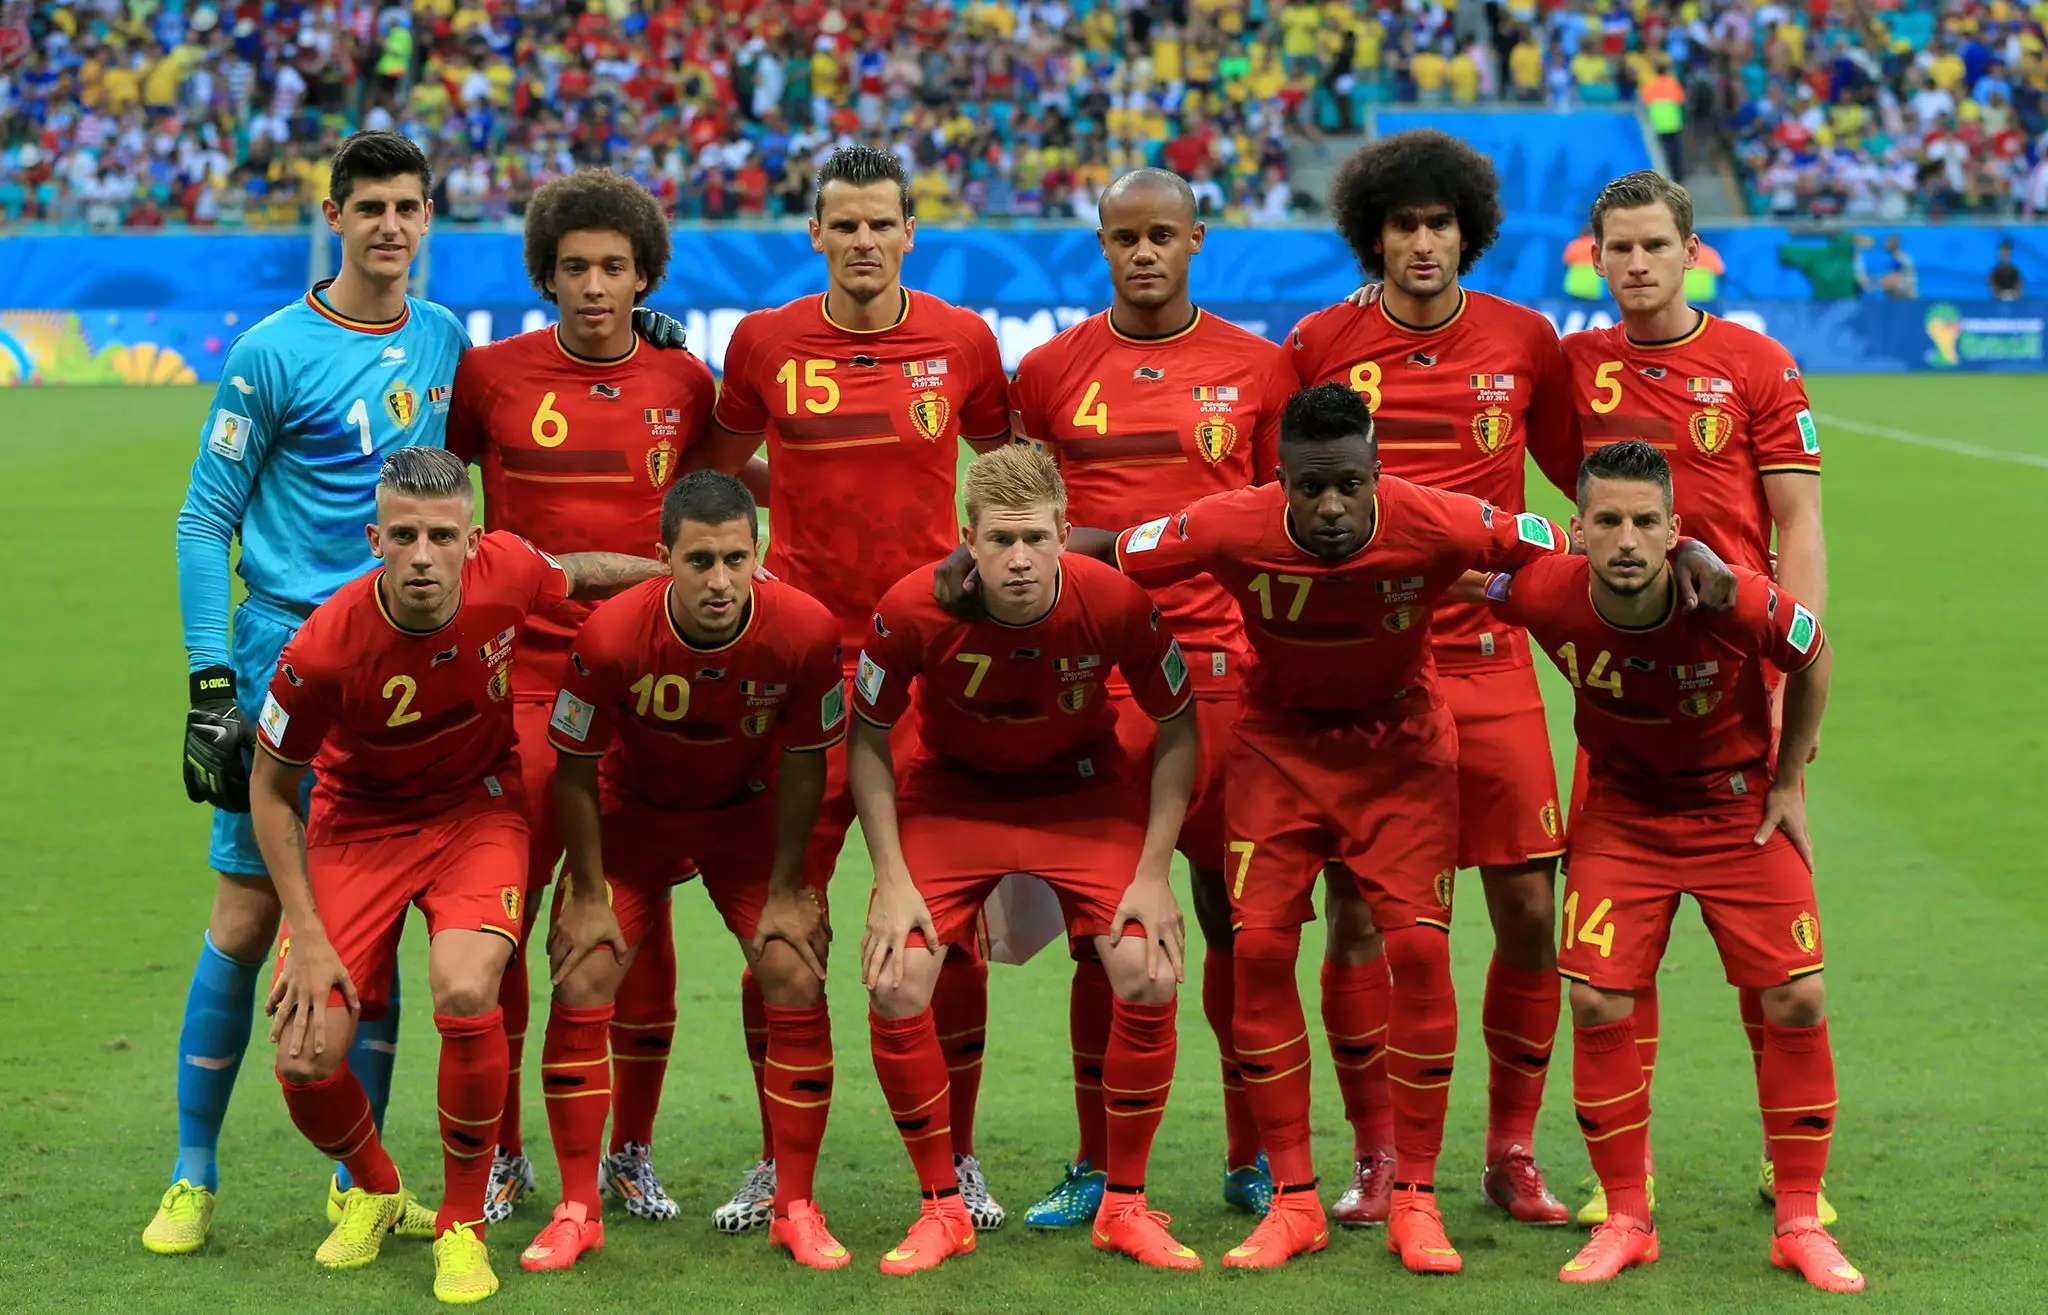 Belgium line up at the 2014 World Cup. Image: PA